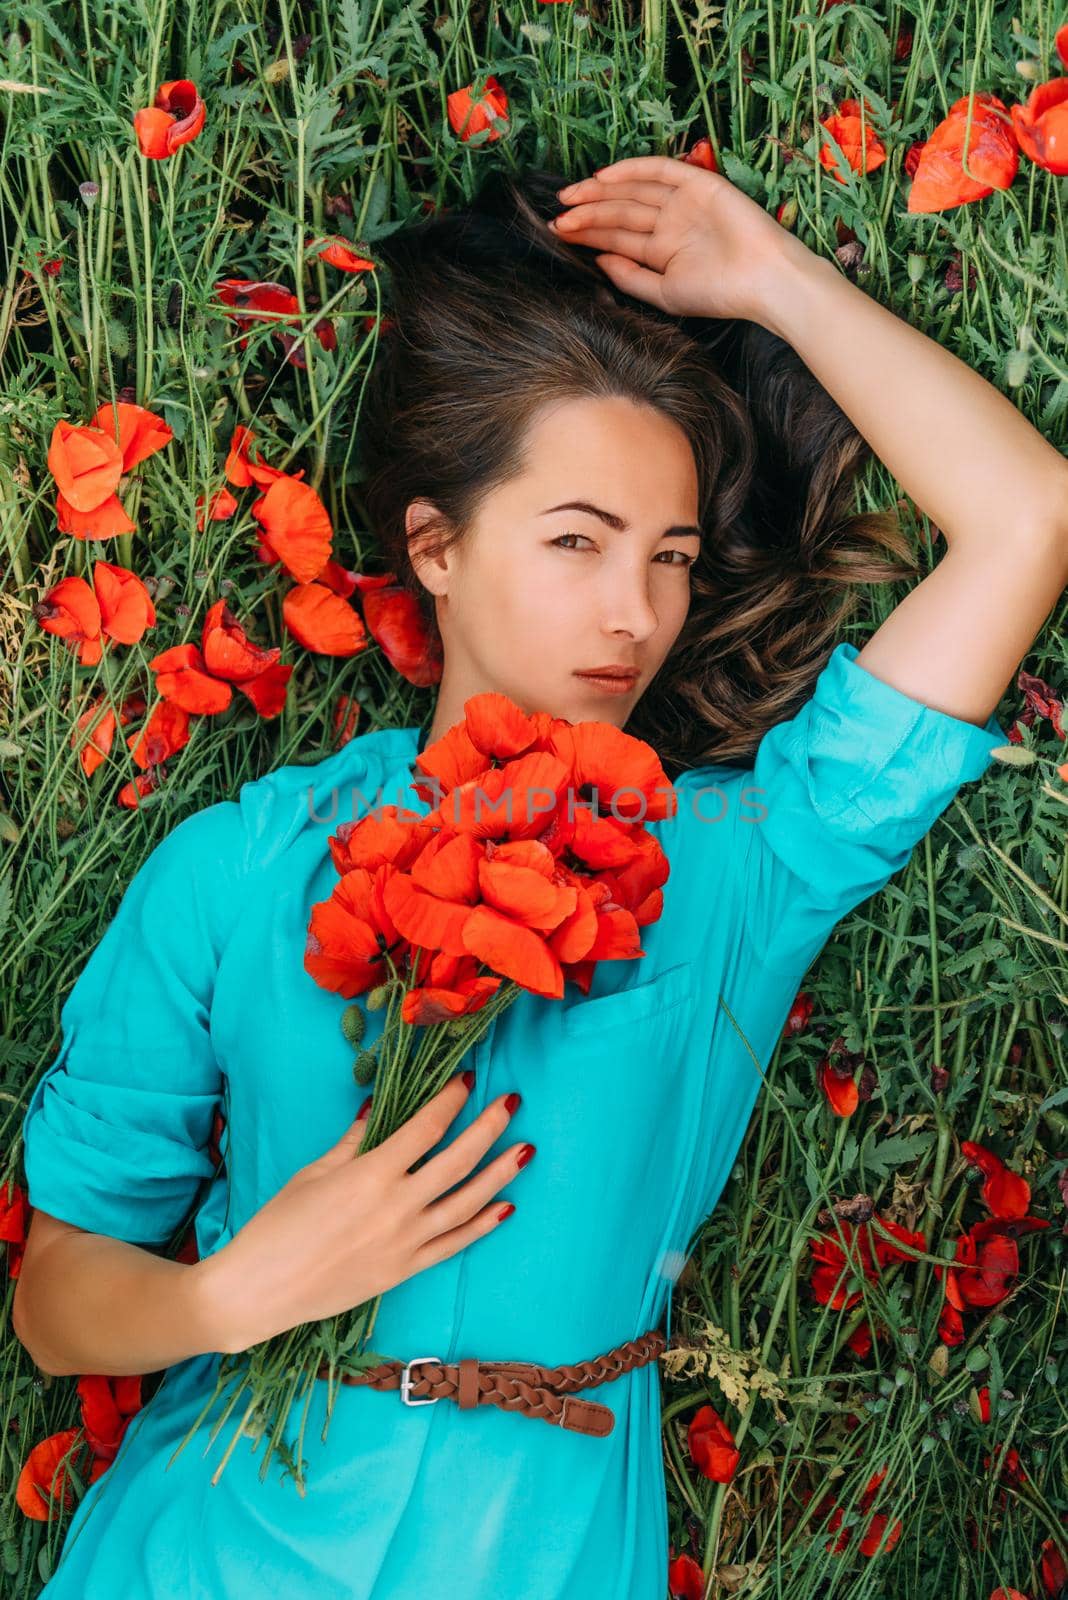 Attractive young woman lying on red poppy meadow with bouquet of flowers, looking at camera. Beauty and fashion concept.